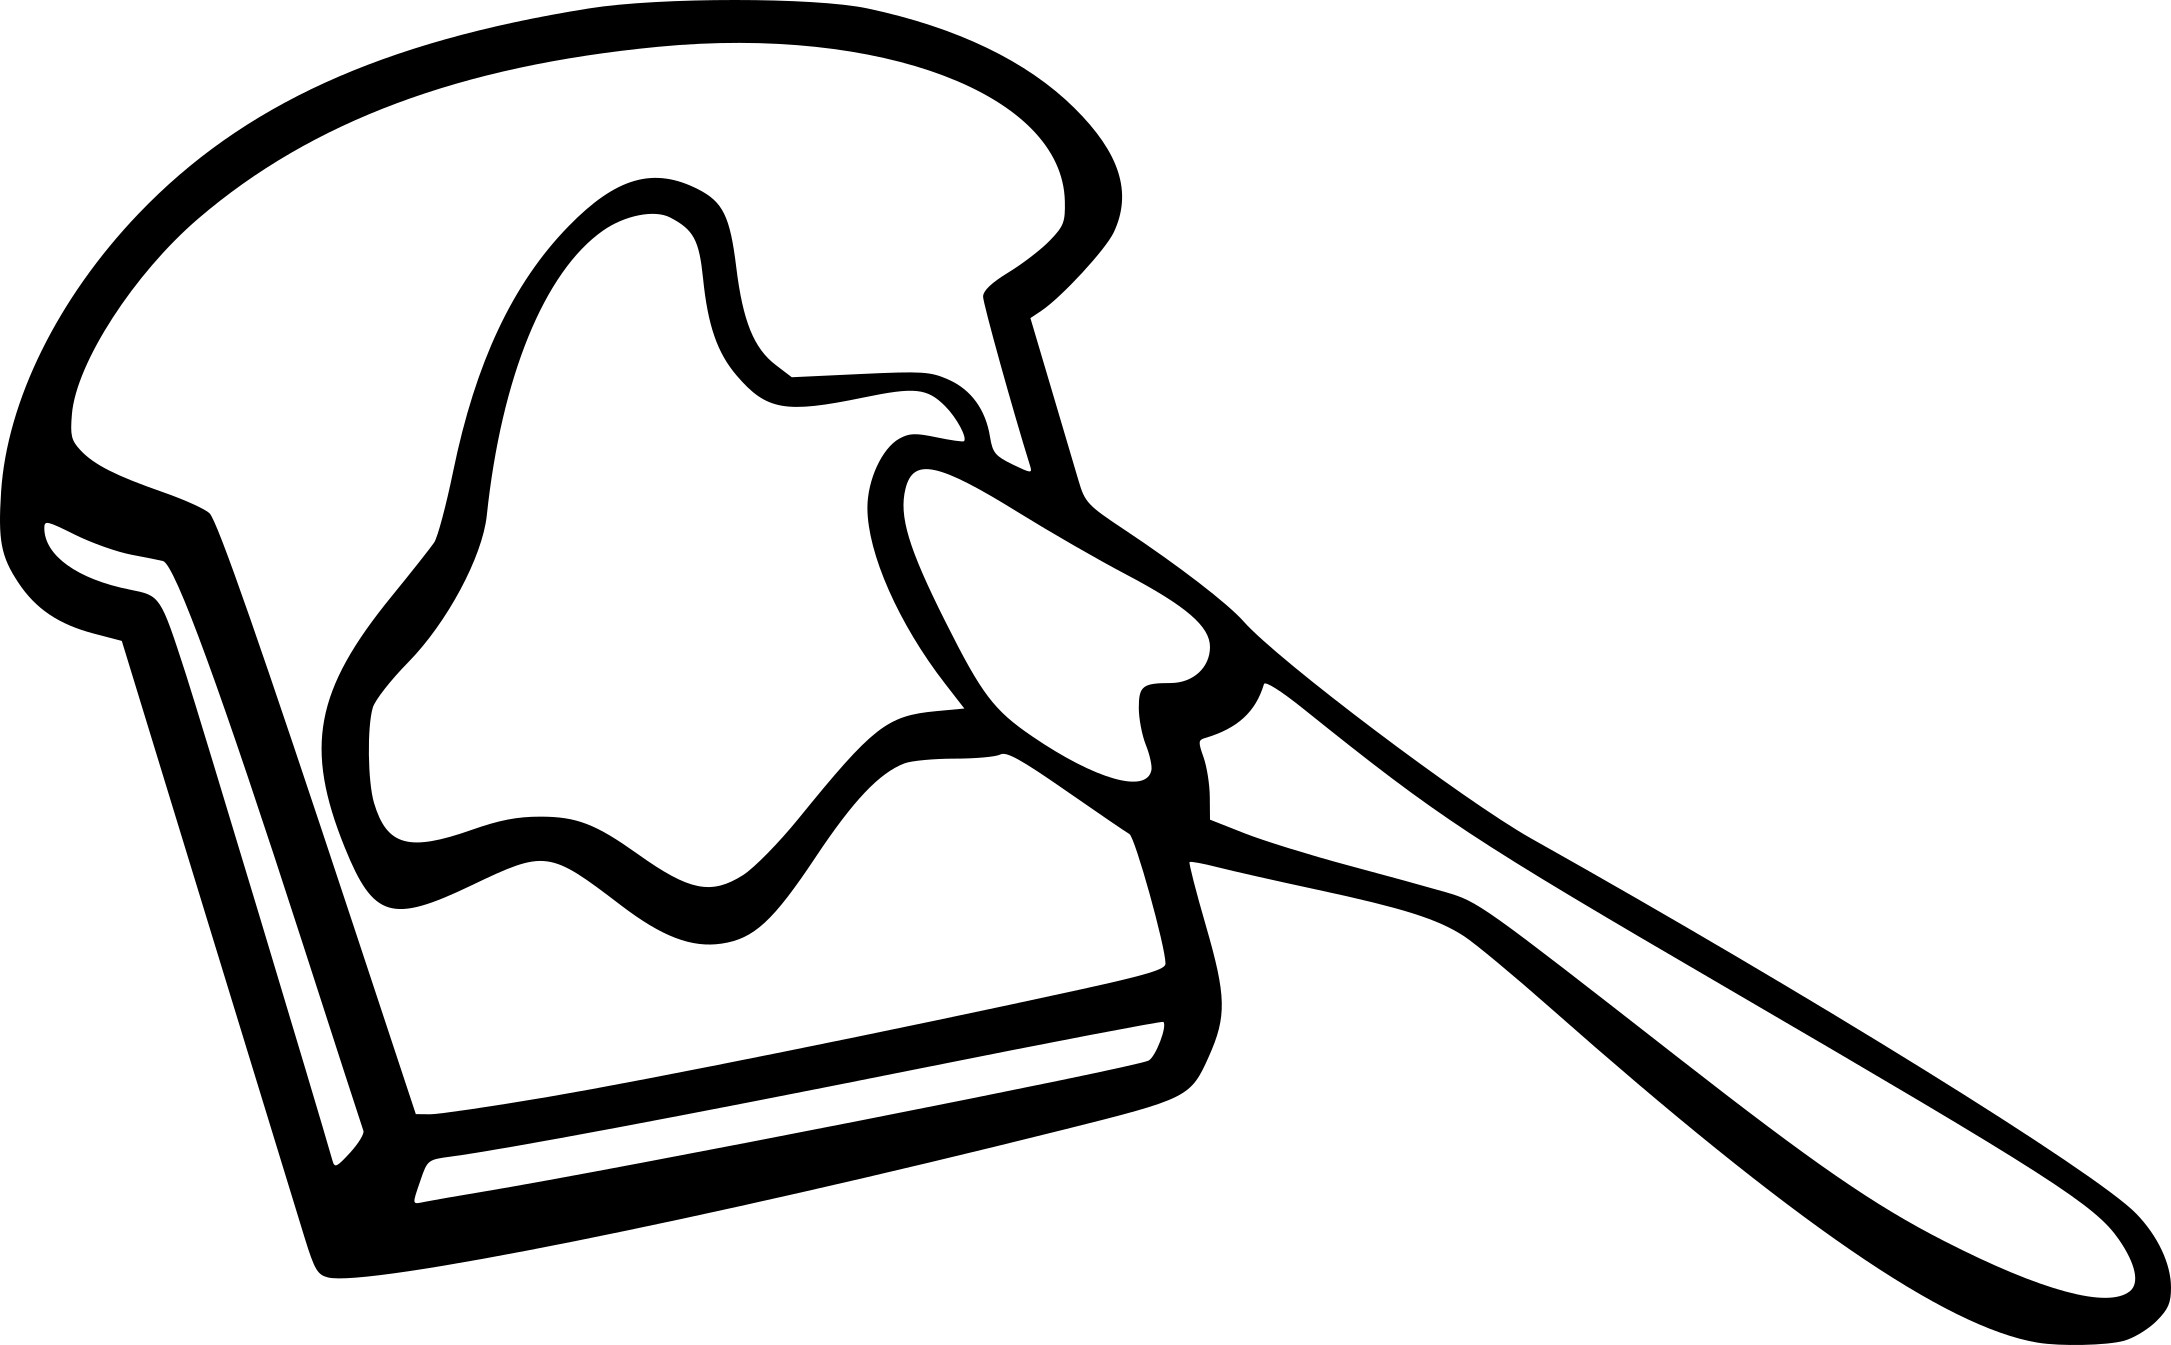 Toast coloring page